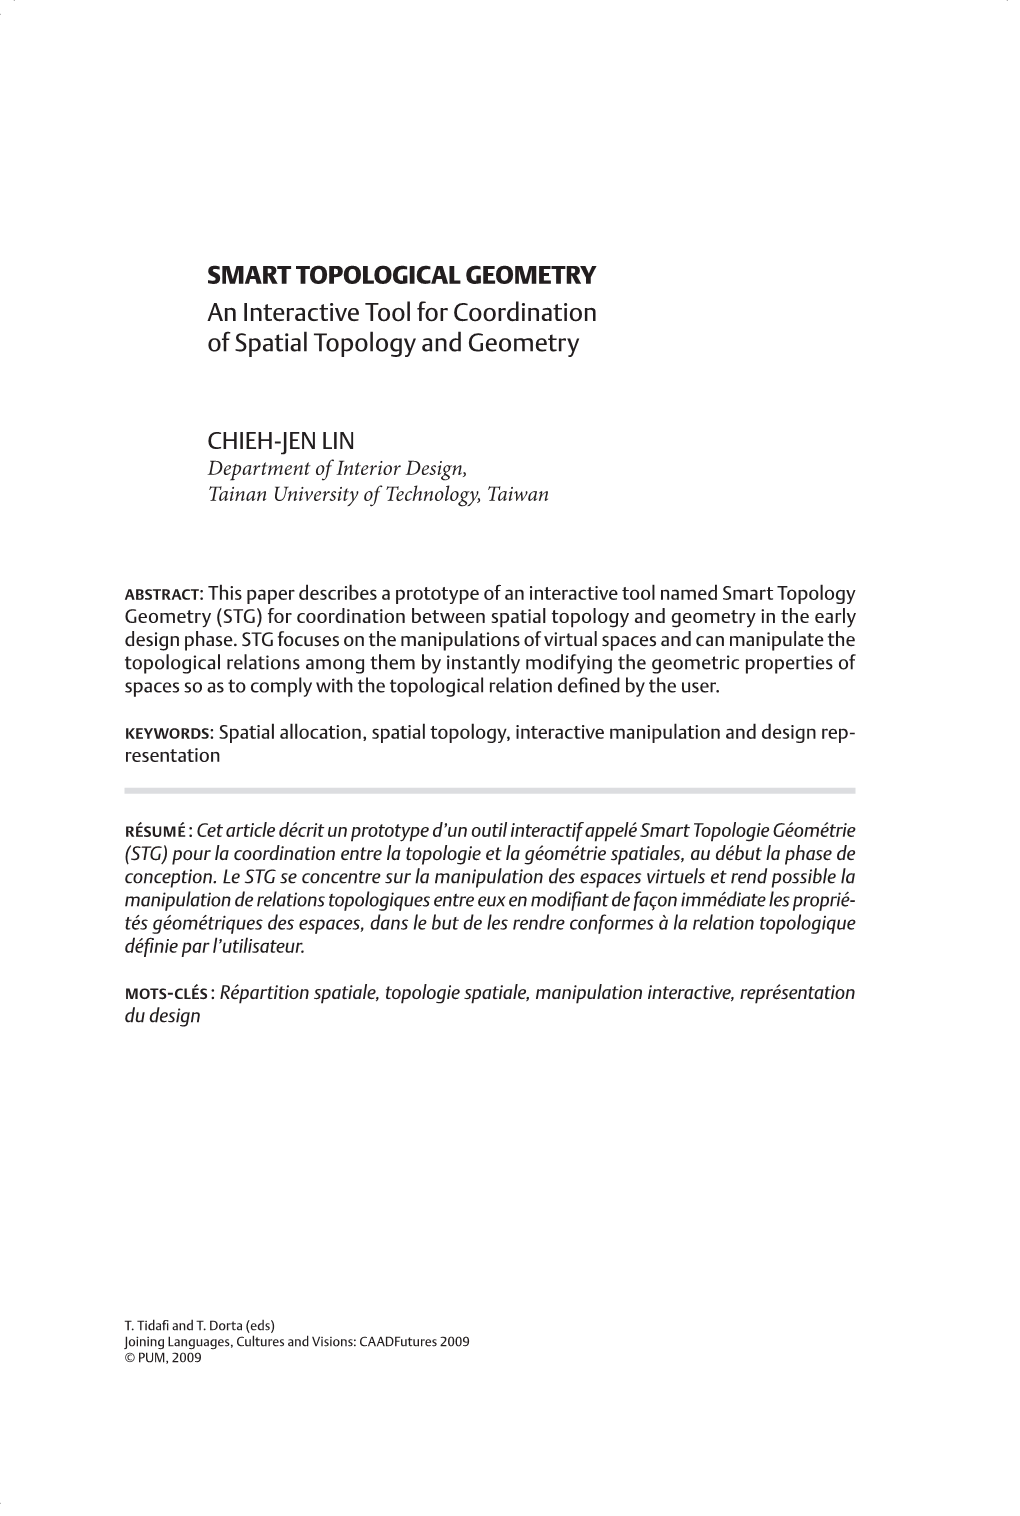 SMART TOPOLOGICAL GEOMETRY an Interactive Tool for Coordination of Spatial Topology and Geometry